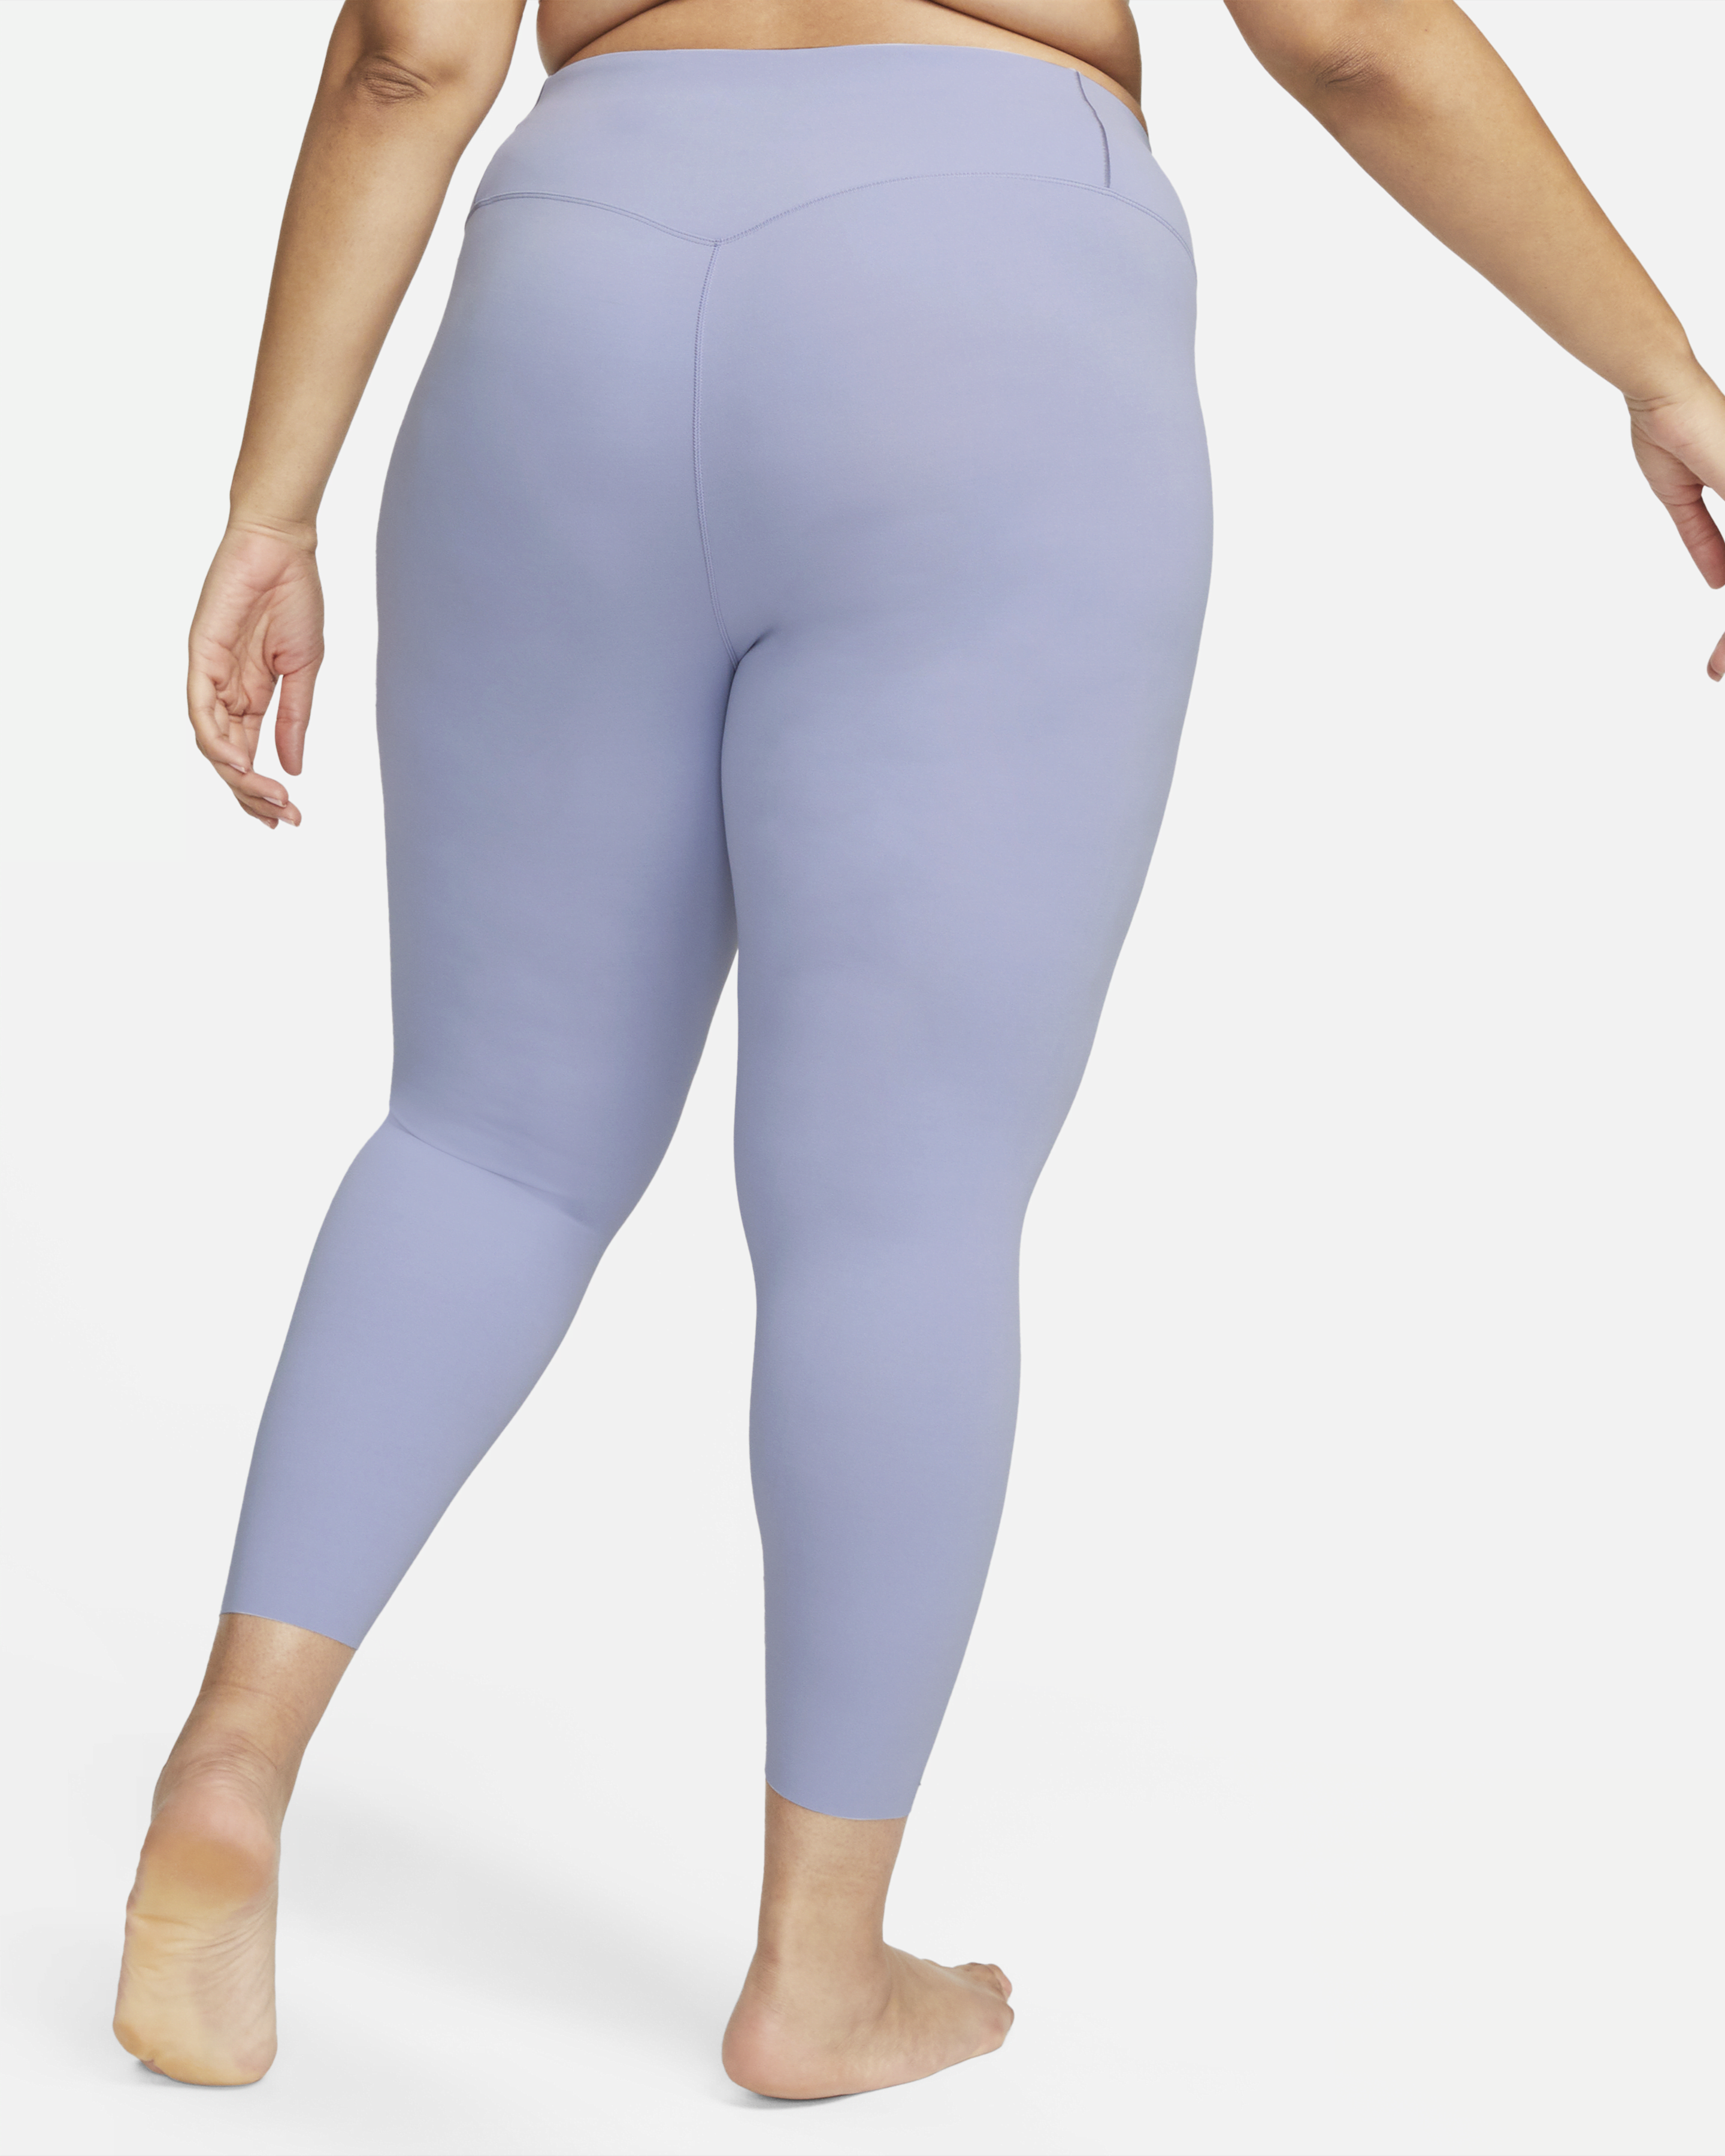 I adore X by Gottex leggings. Best fit and comfort on the market